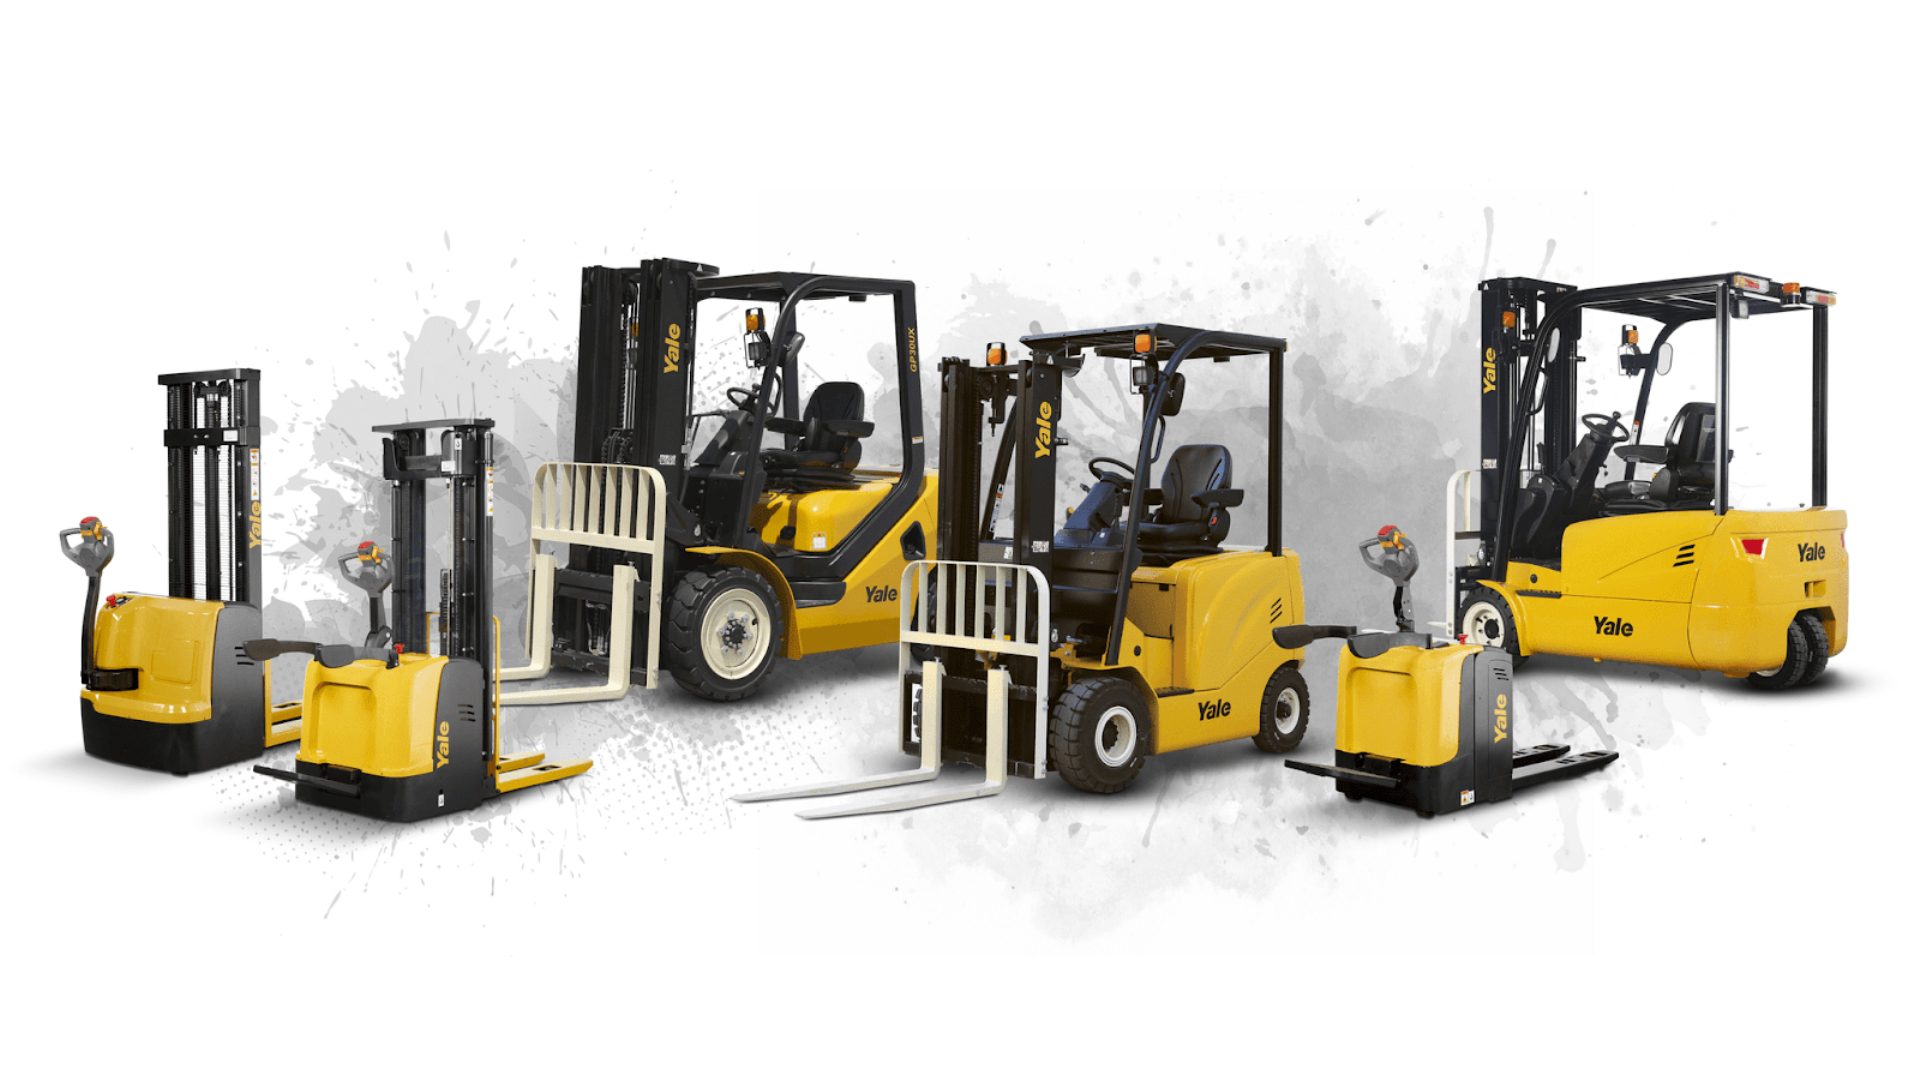 Electric forklifts are the most popular forklifts today